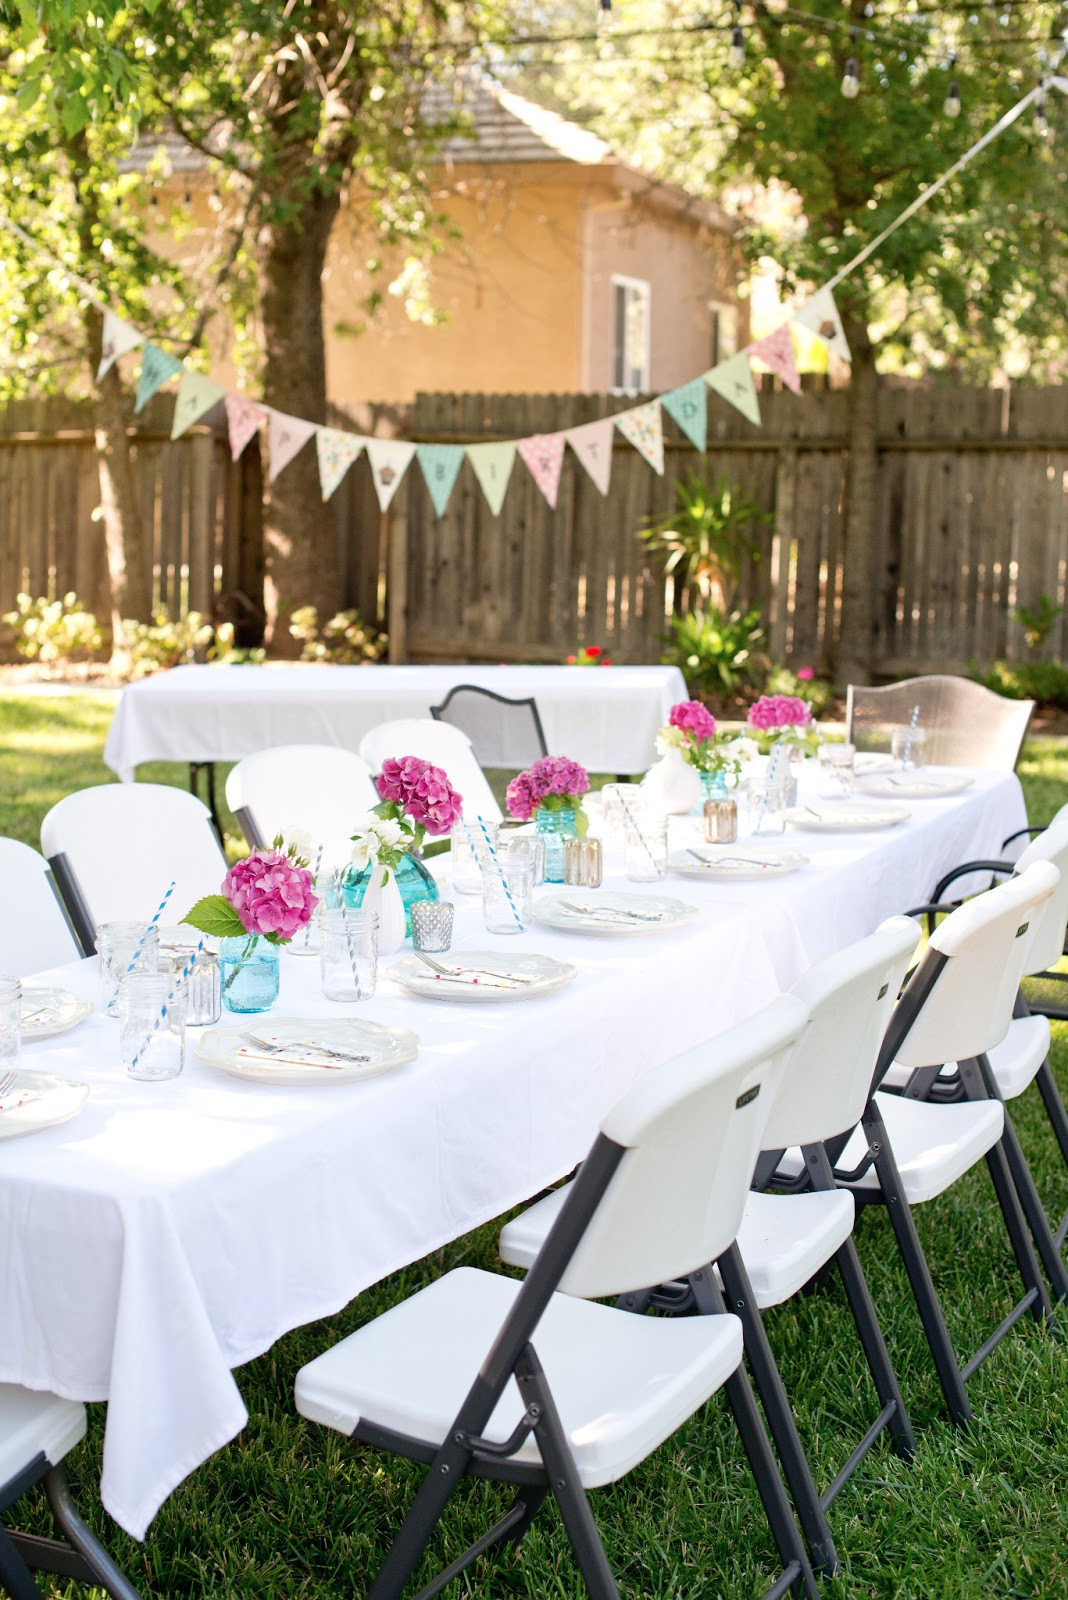 Backyard Party Decorating Ideas
 Backyard Party Decorations For Unfor table Moments